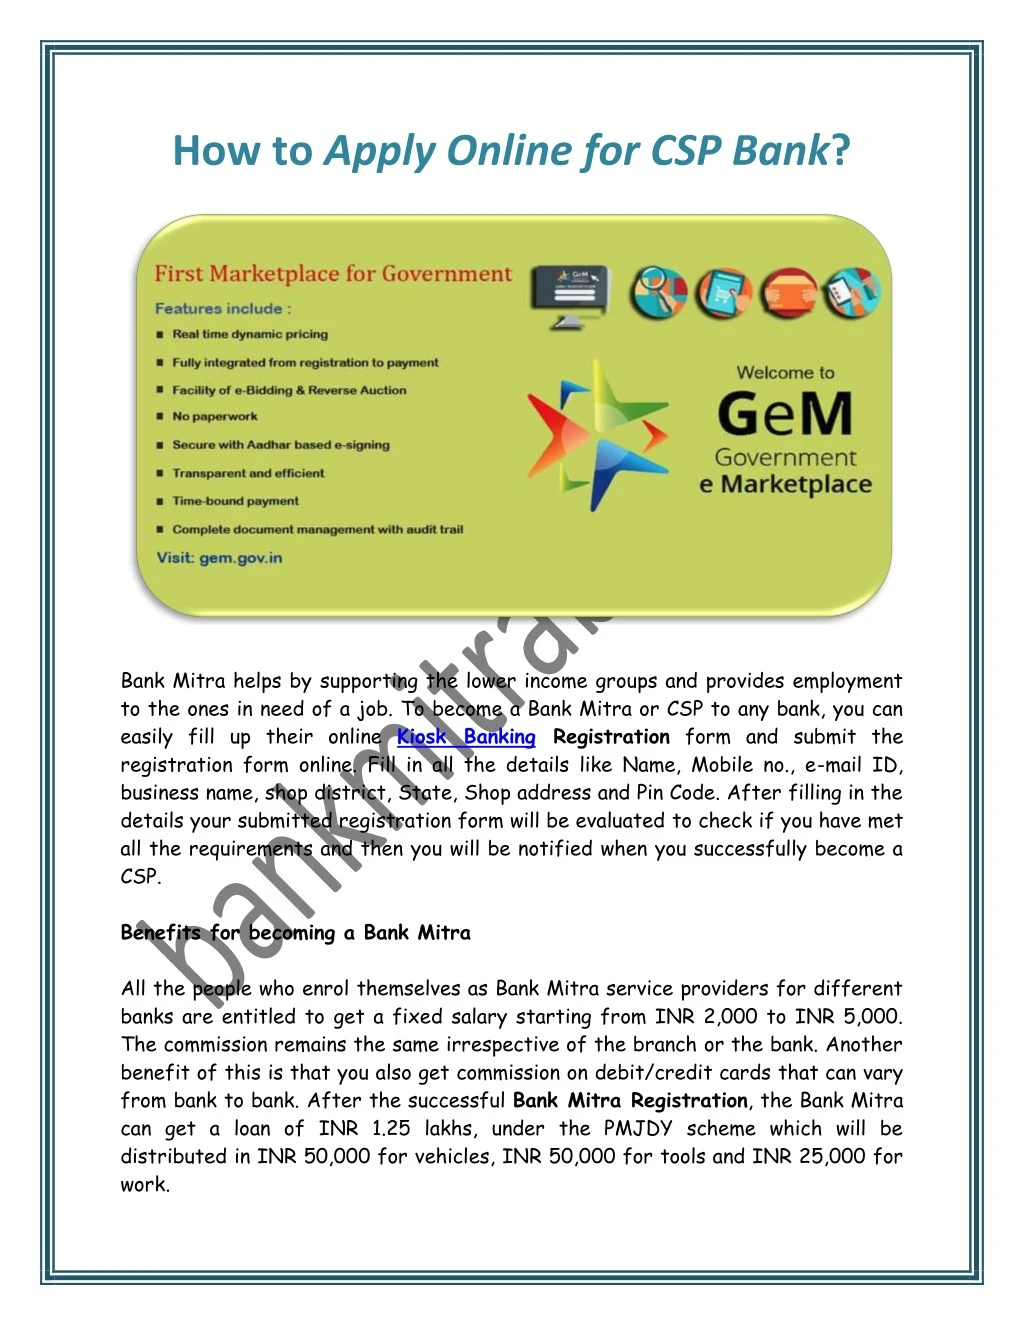 how to apply online for csp bank